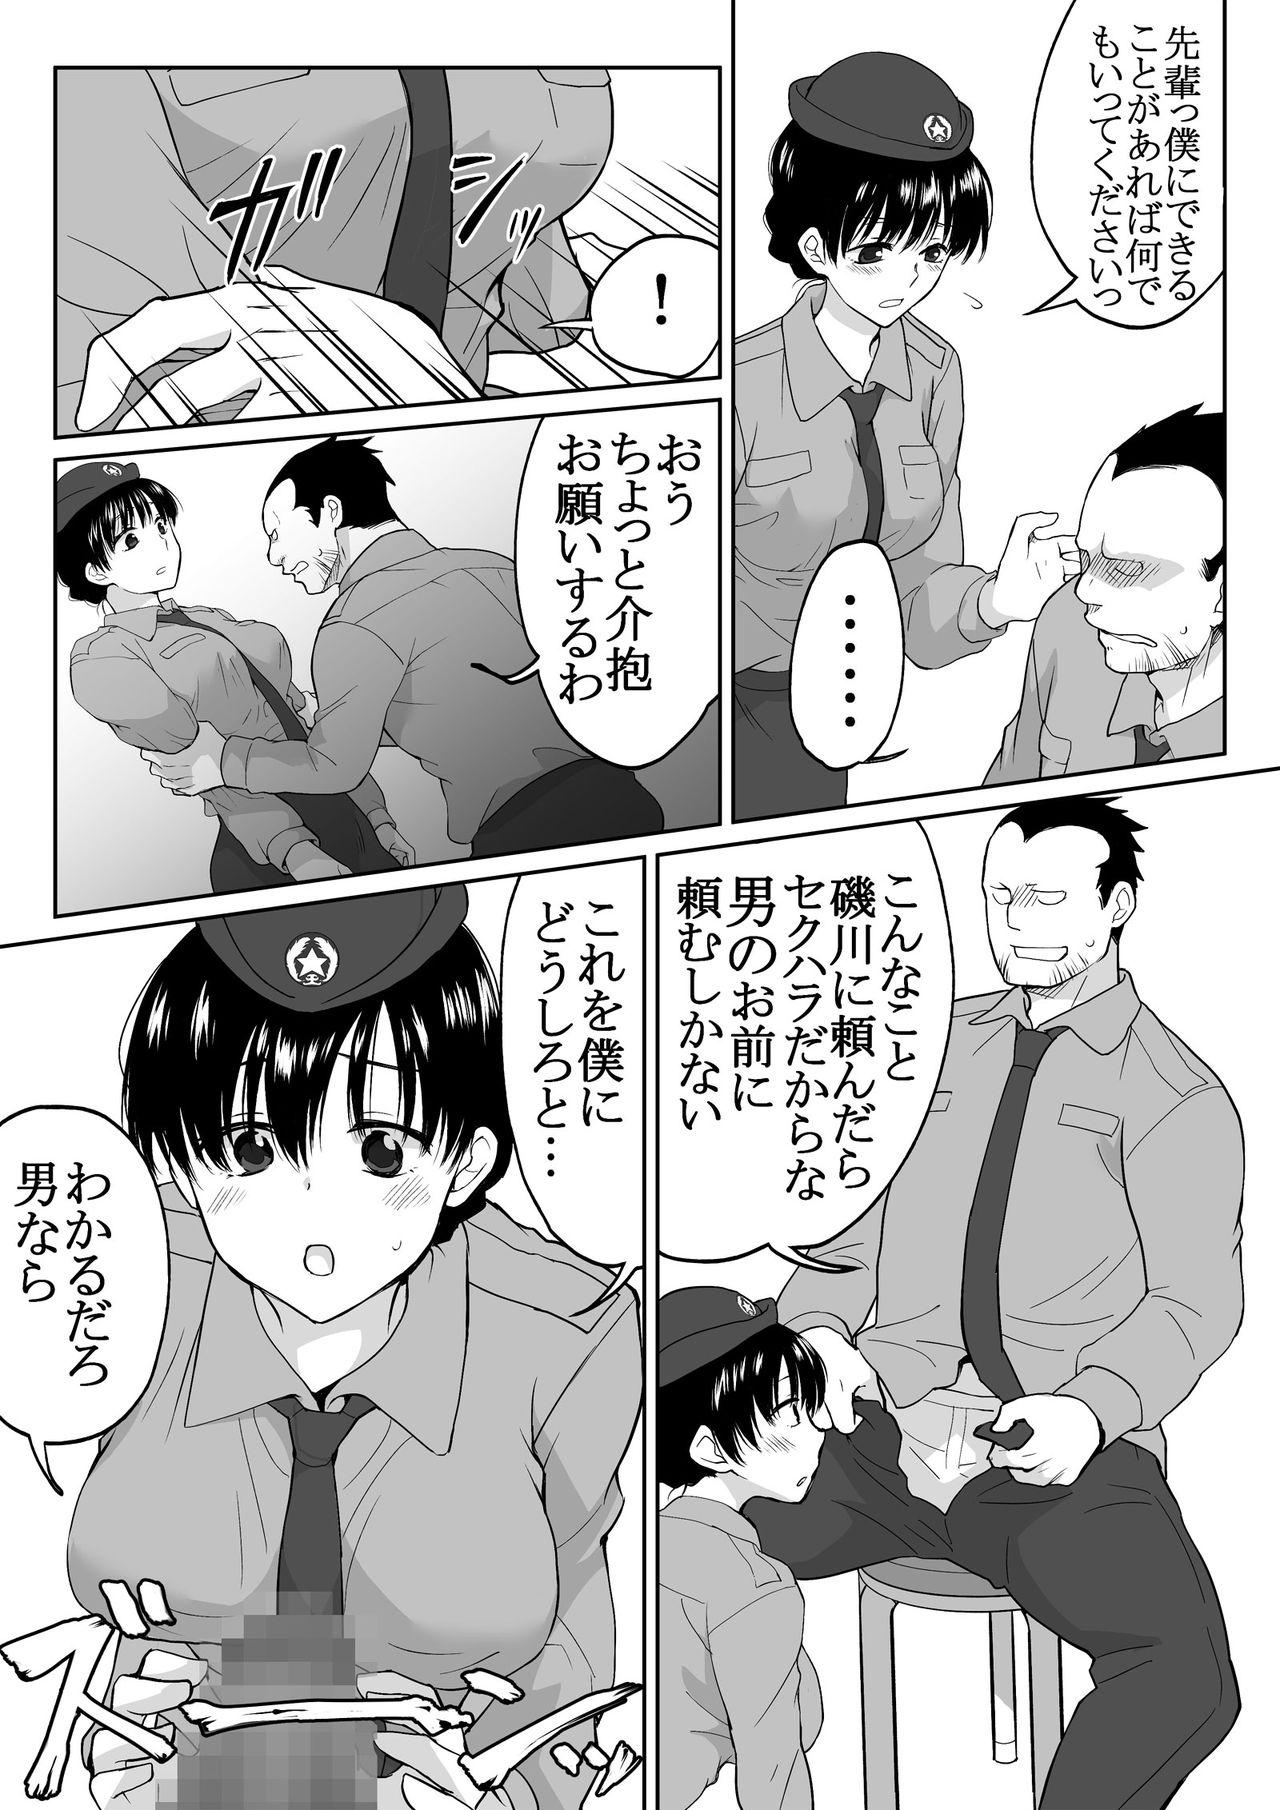 Asia The Clearance Rate of a Policeman Who Turns into a Policegirl - Original Free Amature - Page 6